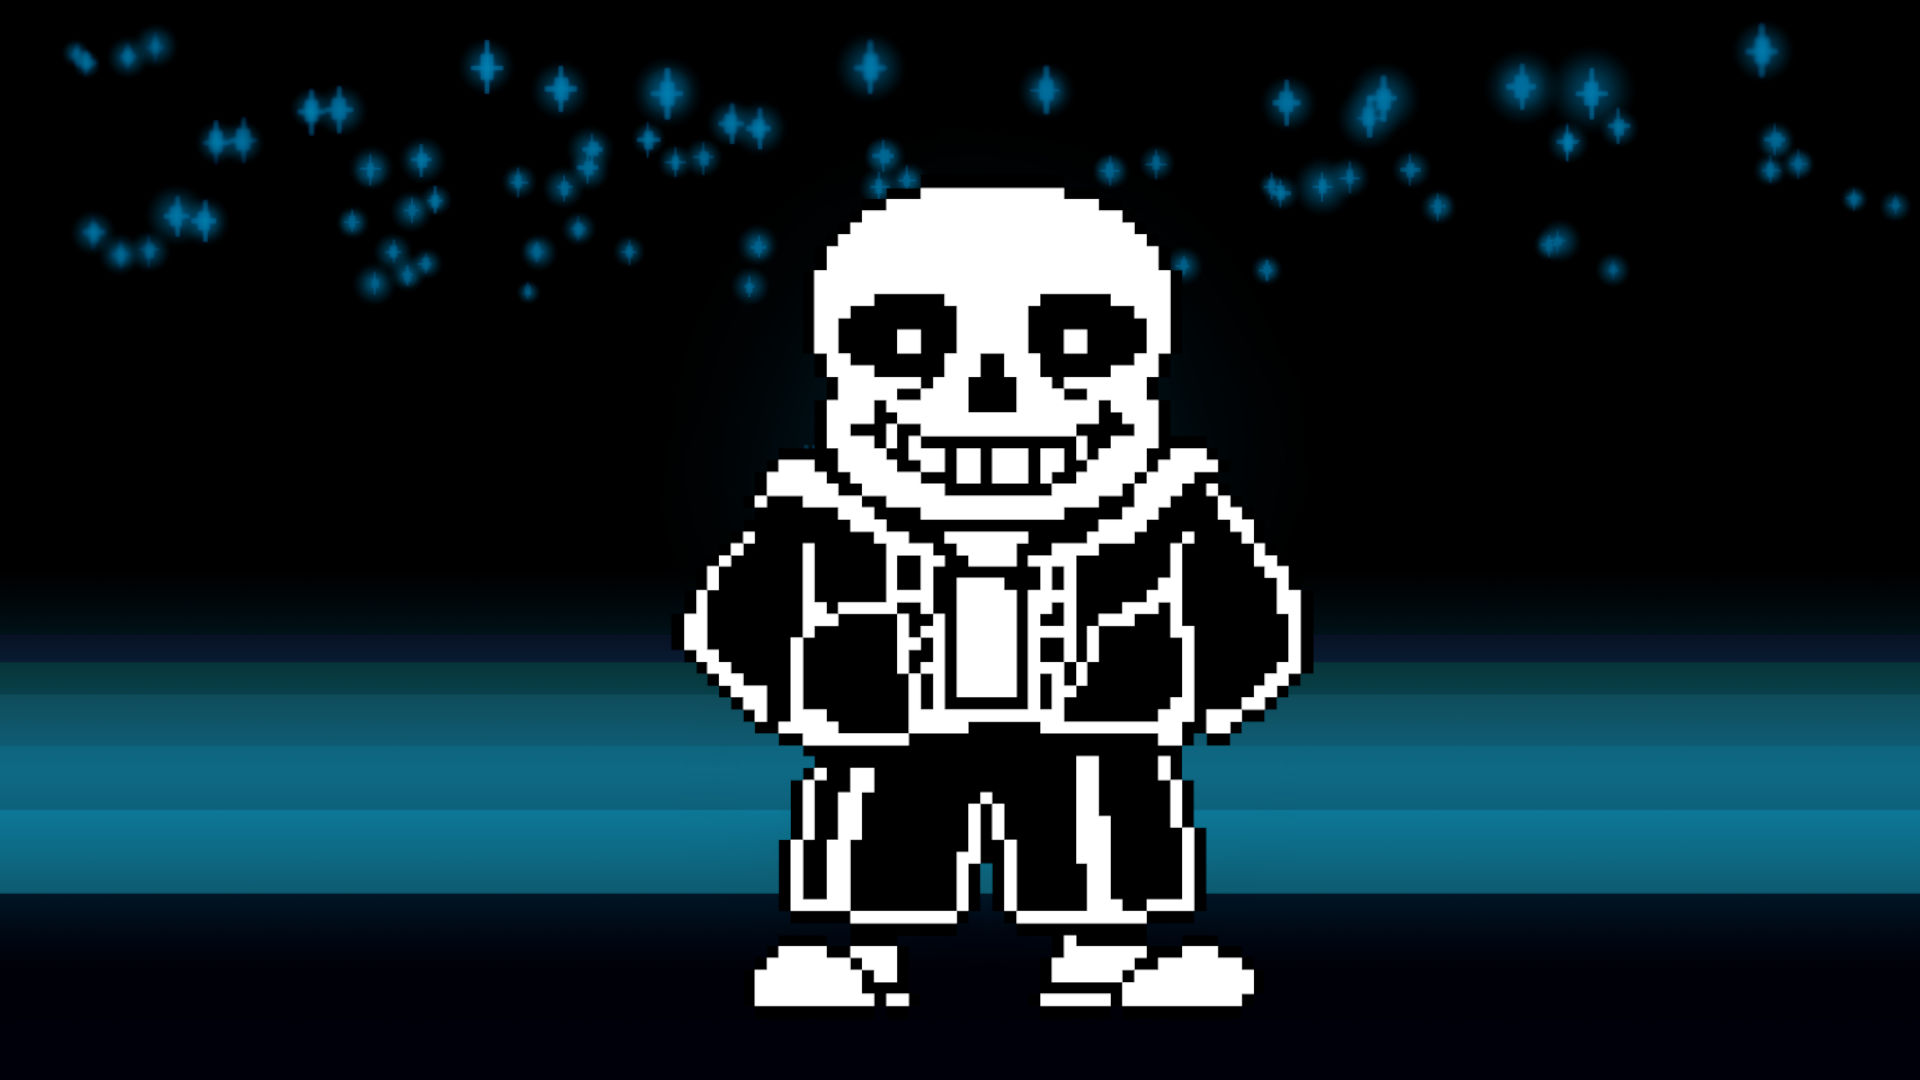 Sans Fight but with two players